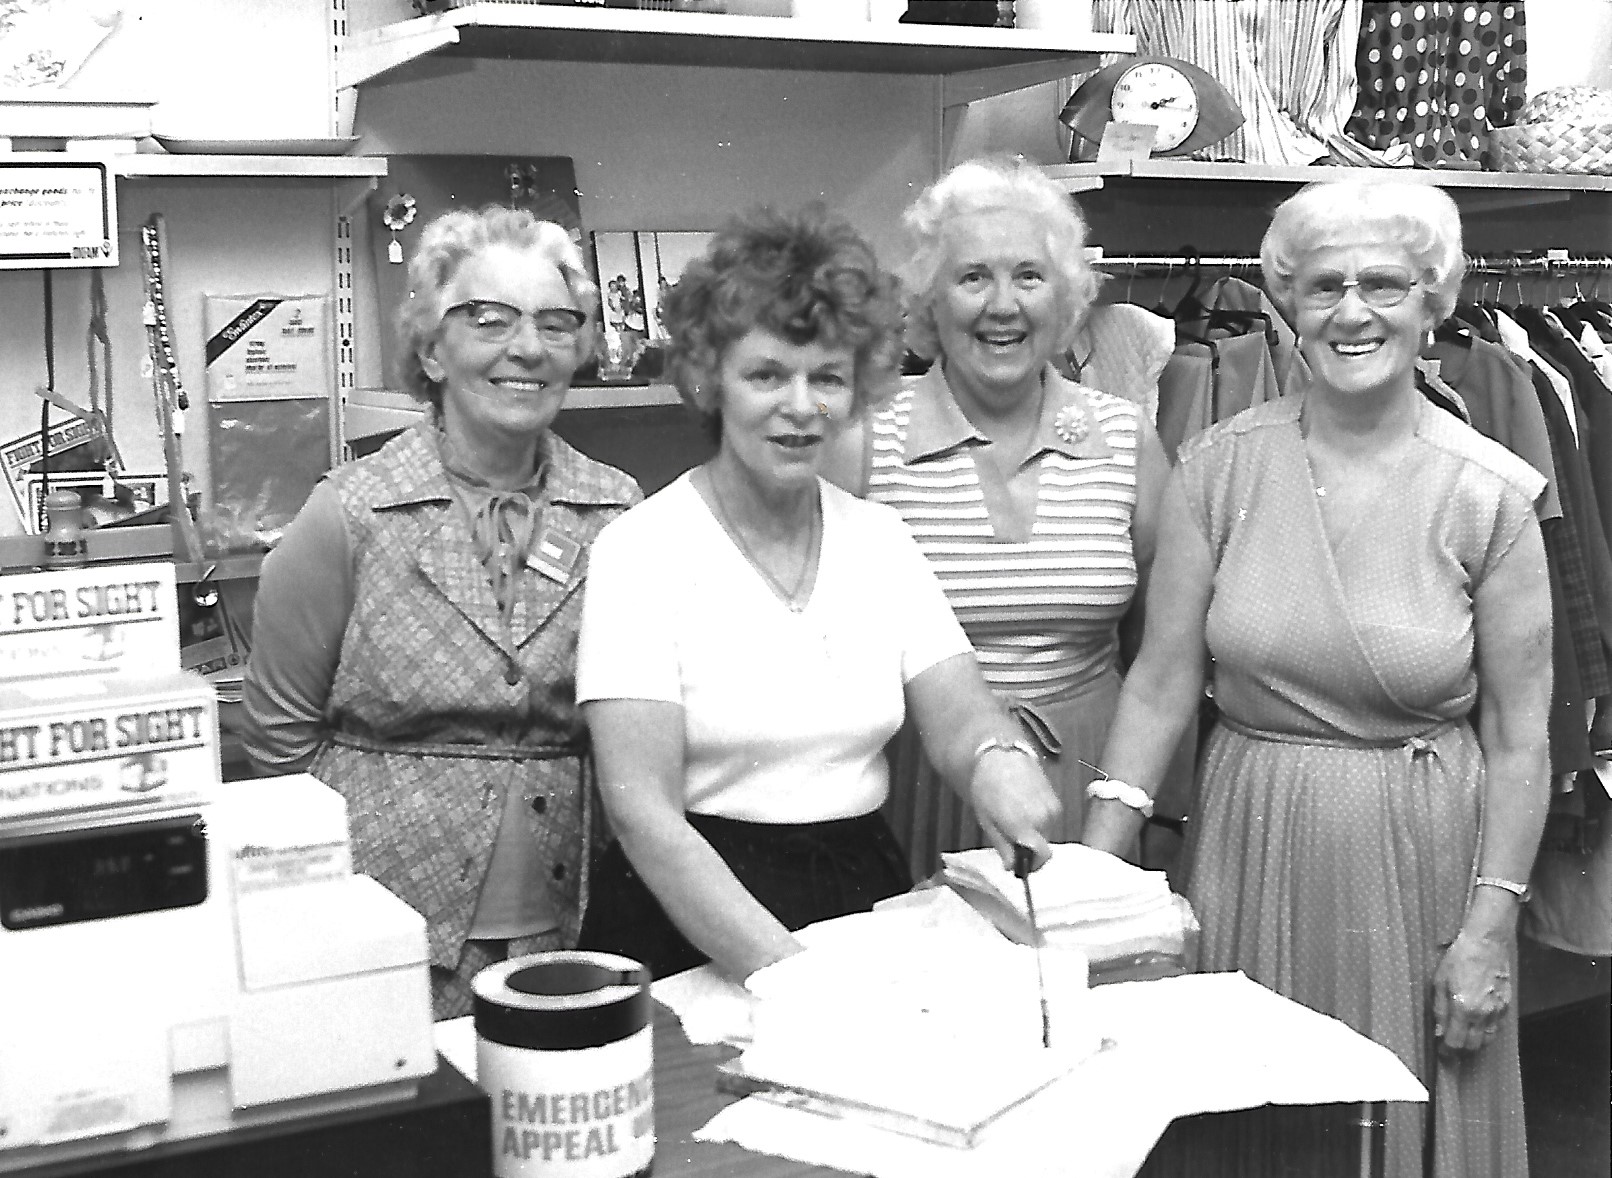 Oxfam volunteers gather at the Oxfam shop in Southport in June 1983